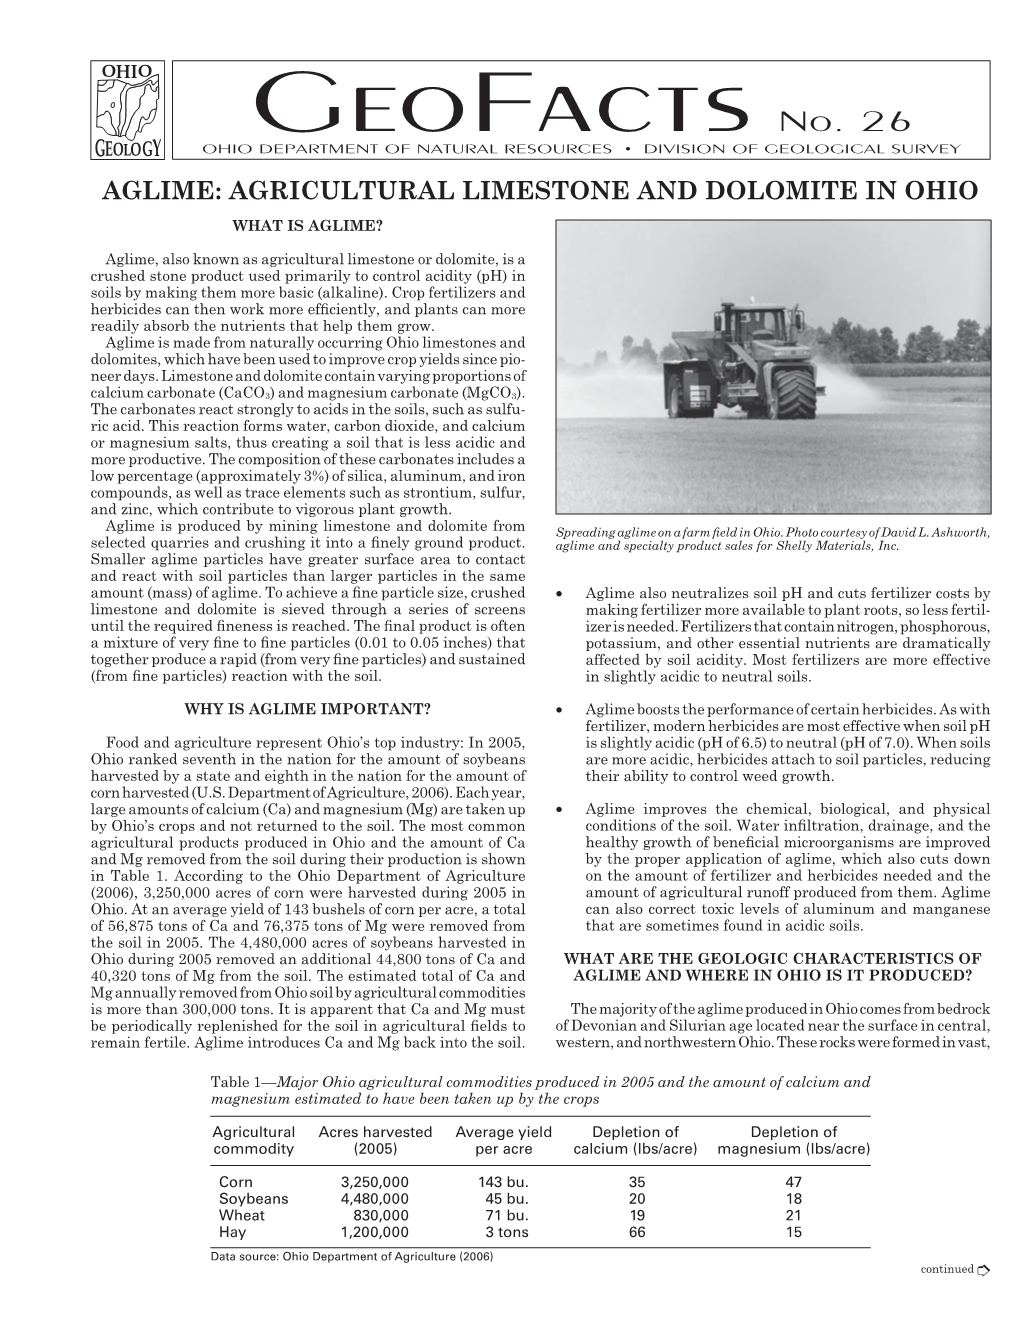 Aglime: Agricultural Limestone and Dolomite in Ohio What Is Aglime?